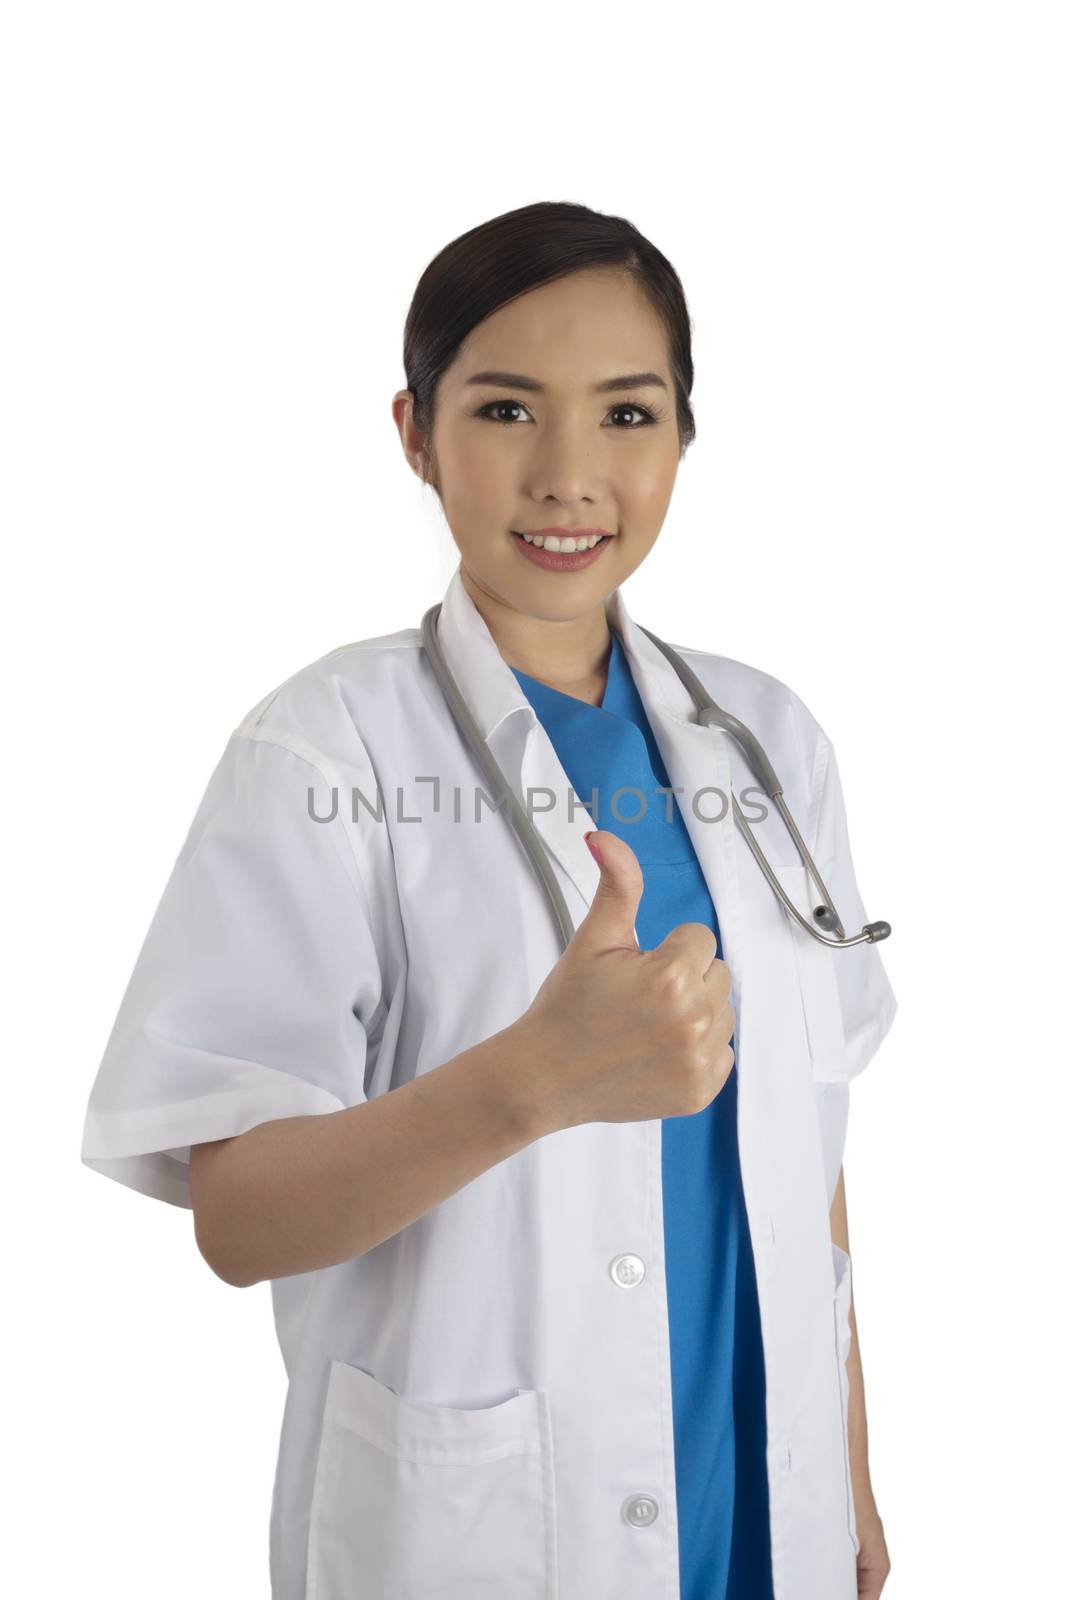 Female doctor in uniform show her thumb up for excellence medical care service on white background.